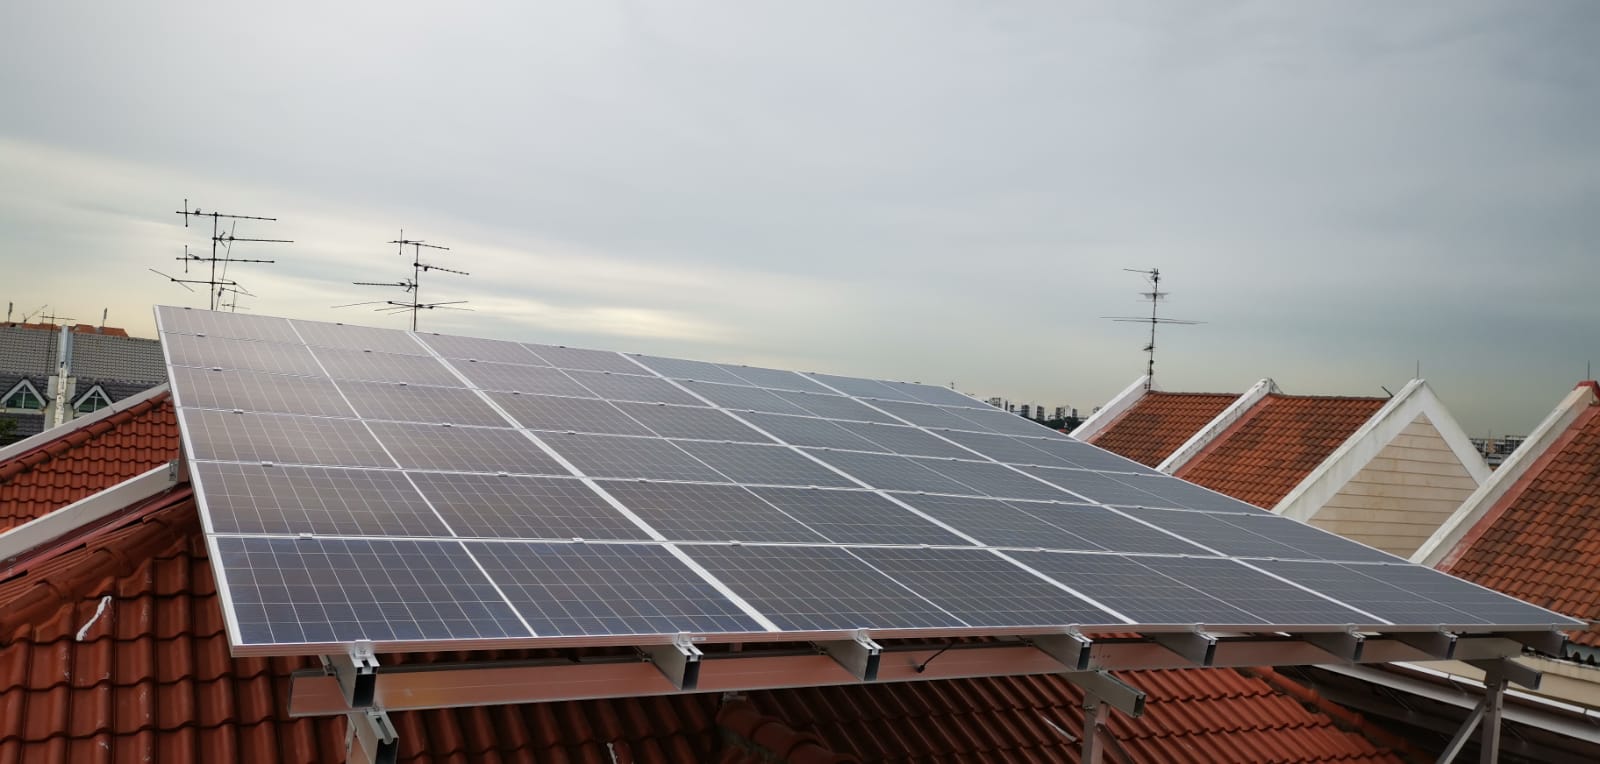 Roof Solar mounting structures installed in Singapore in October ,2020